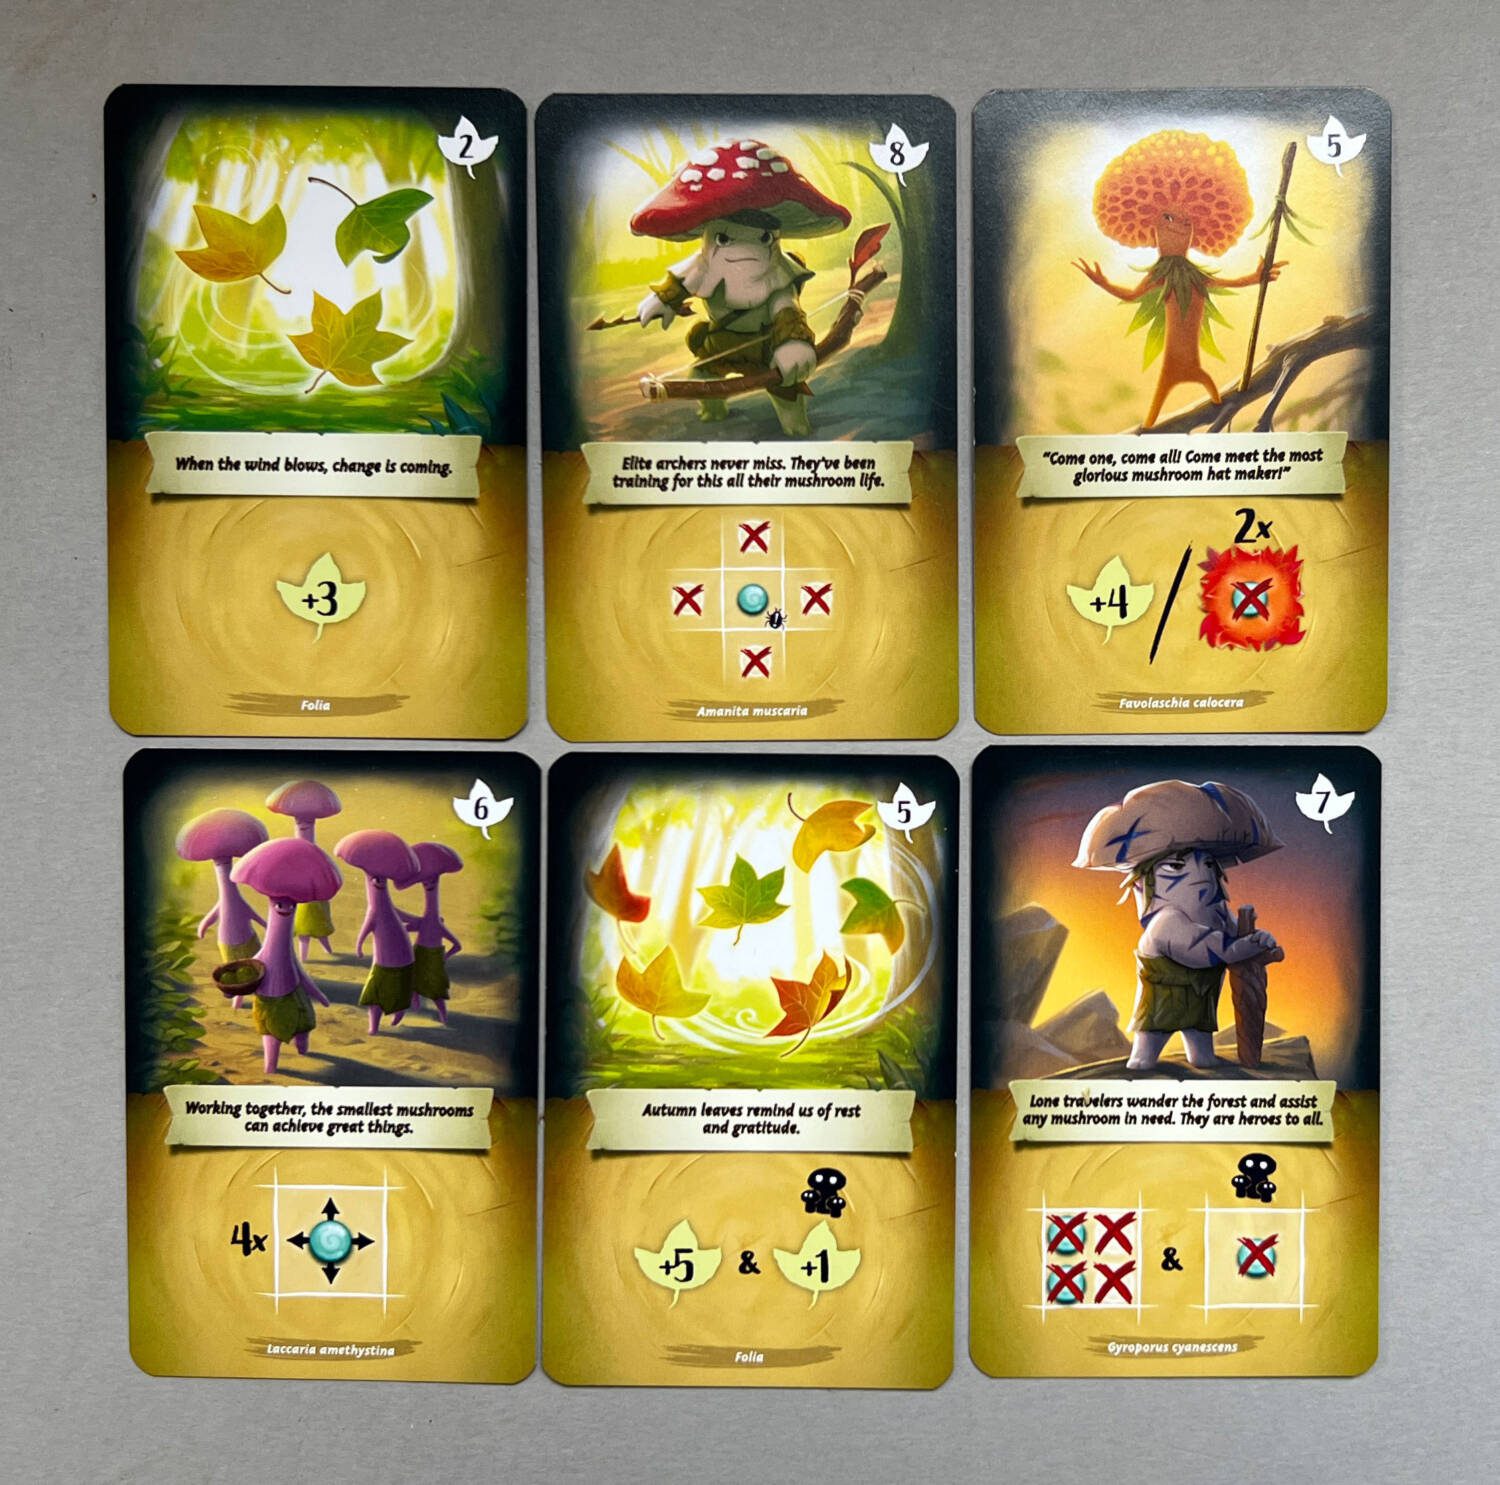 Additional cards that can be purchased with Leaves during the game.